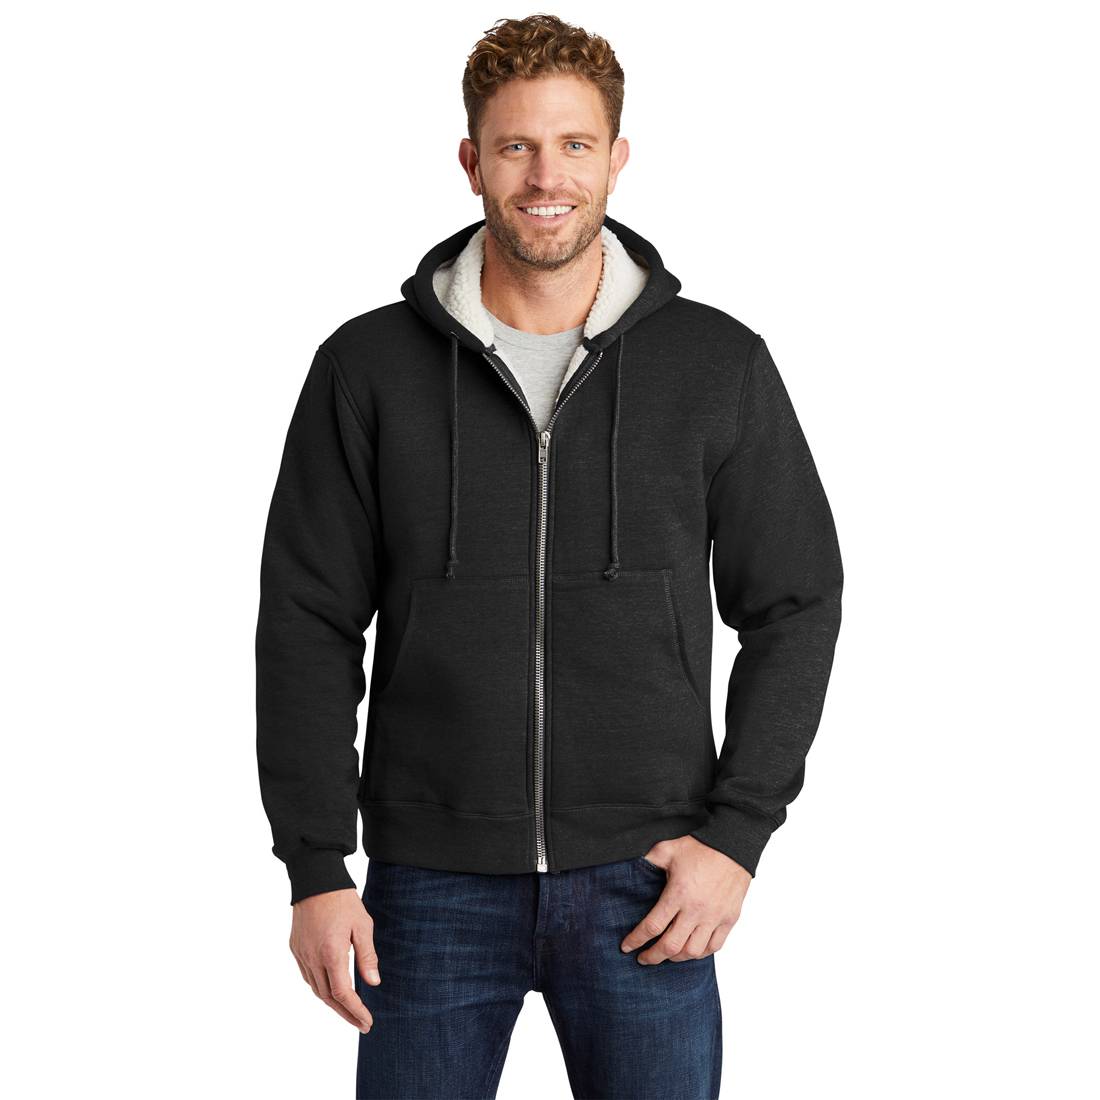 Apparel & Accessories :: Jackets & Vests :: Sherpa Lined Hooded Fleece ...